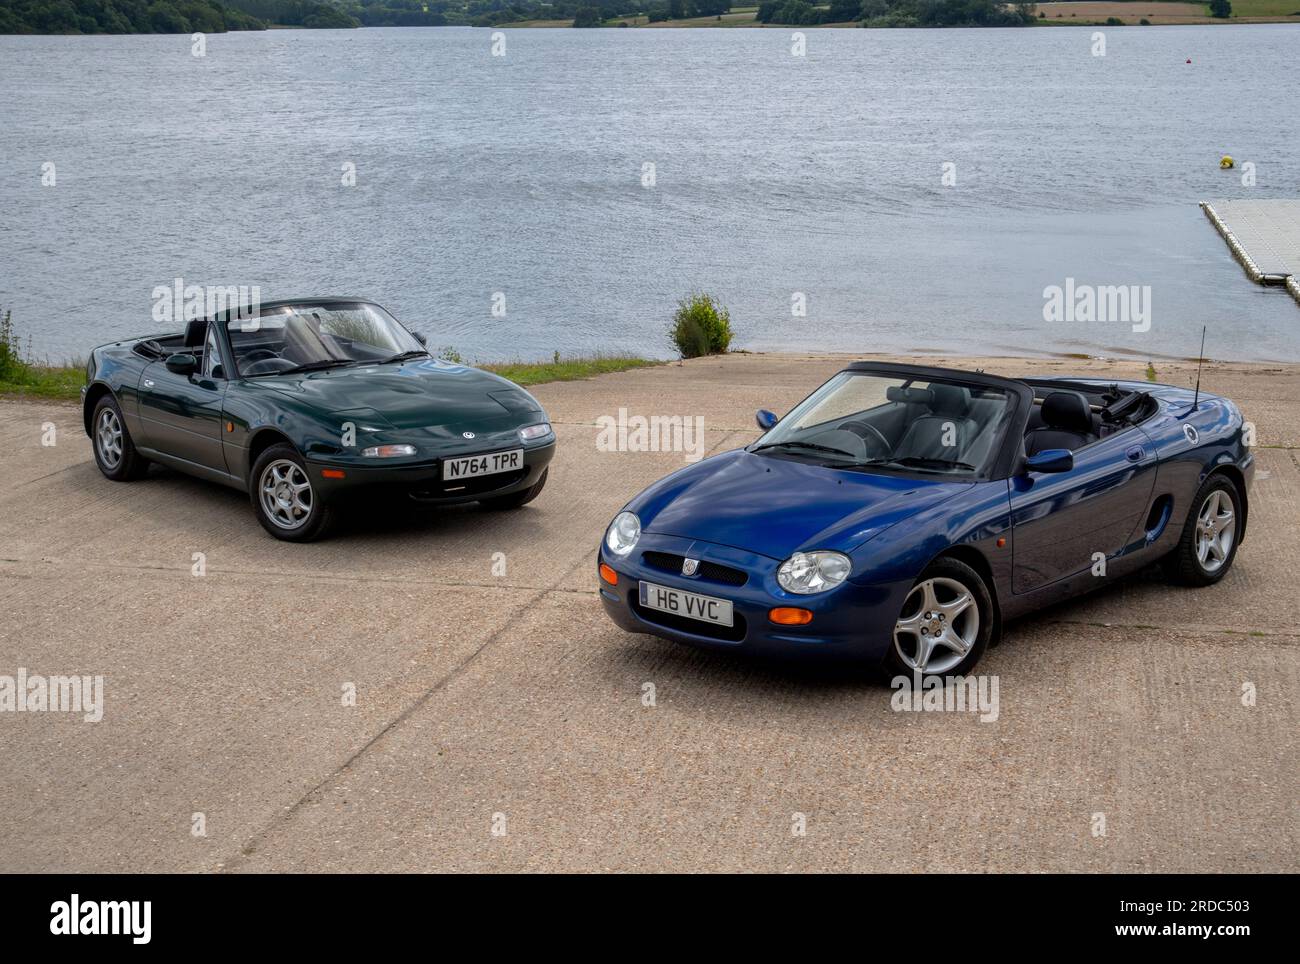 MGF and Mk1 Mazda MX5 open top sports cars Stock Photo